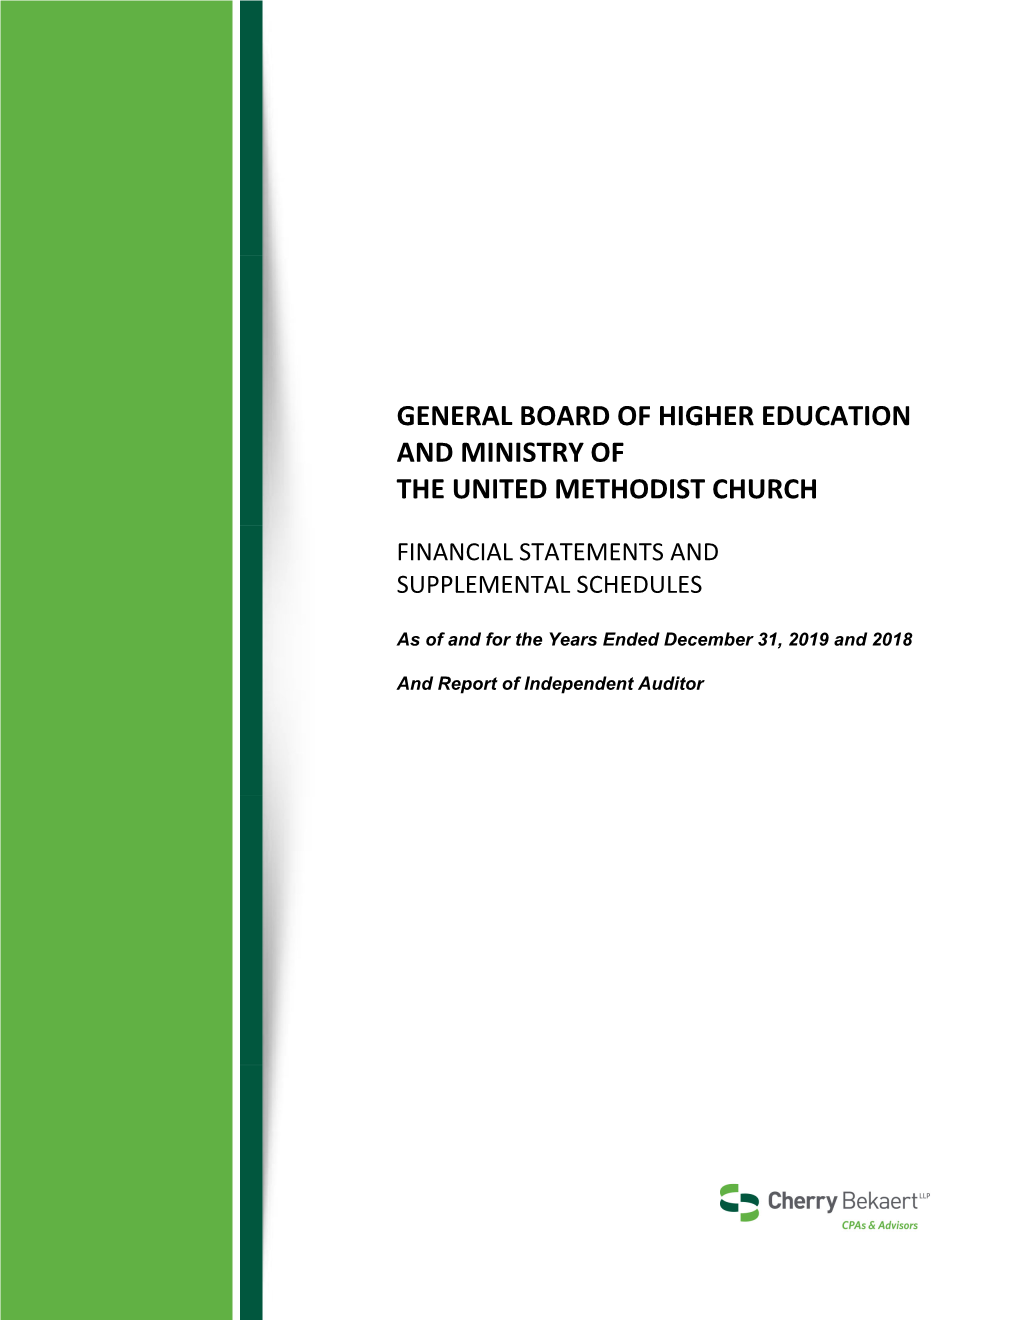 General Board of Higher Education and Ministry of the United Methodist Church